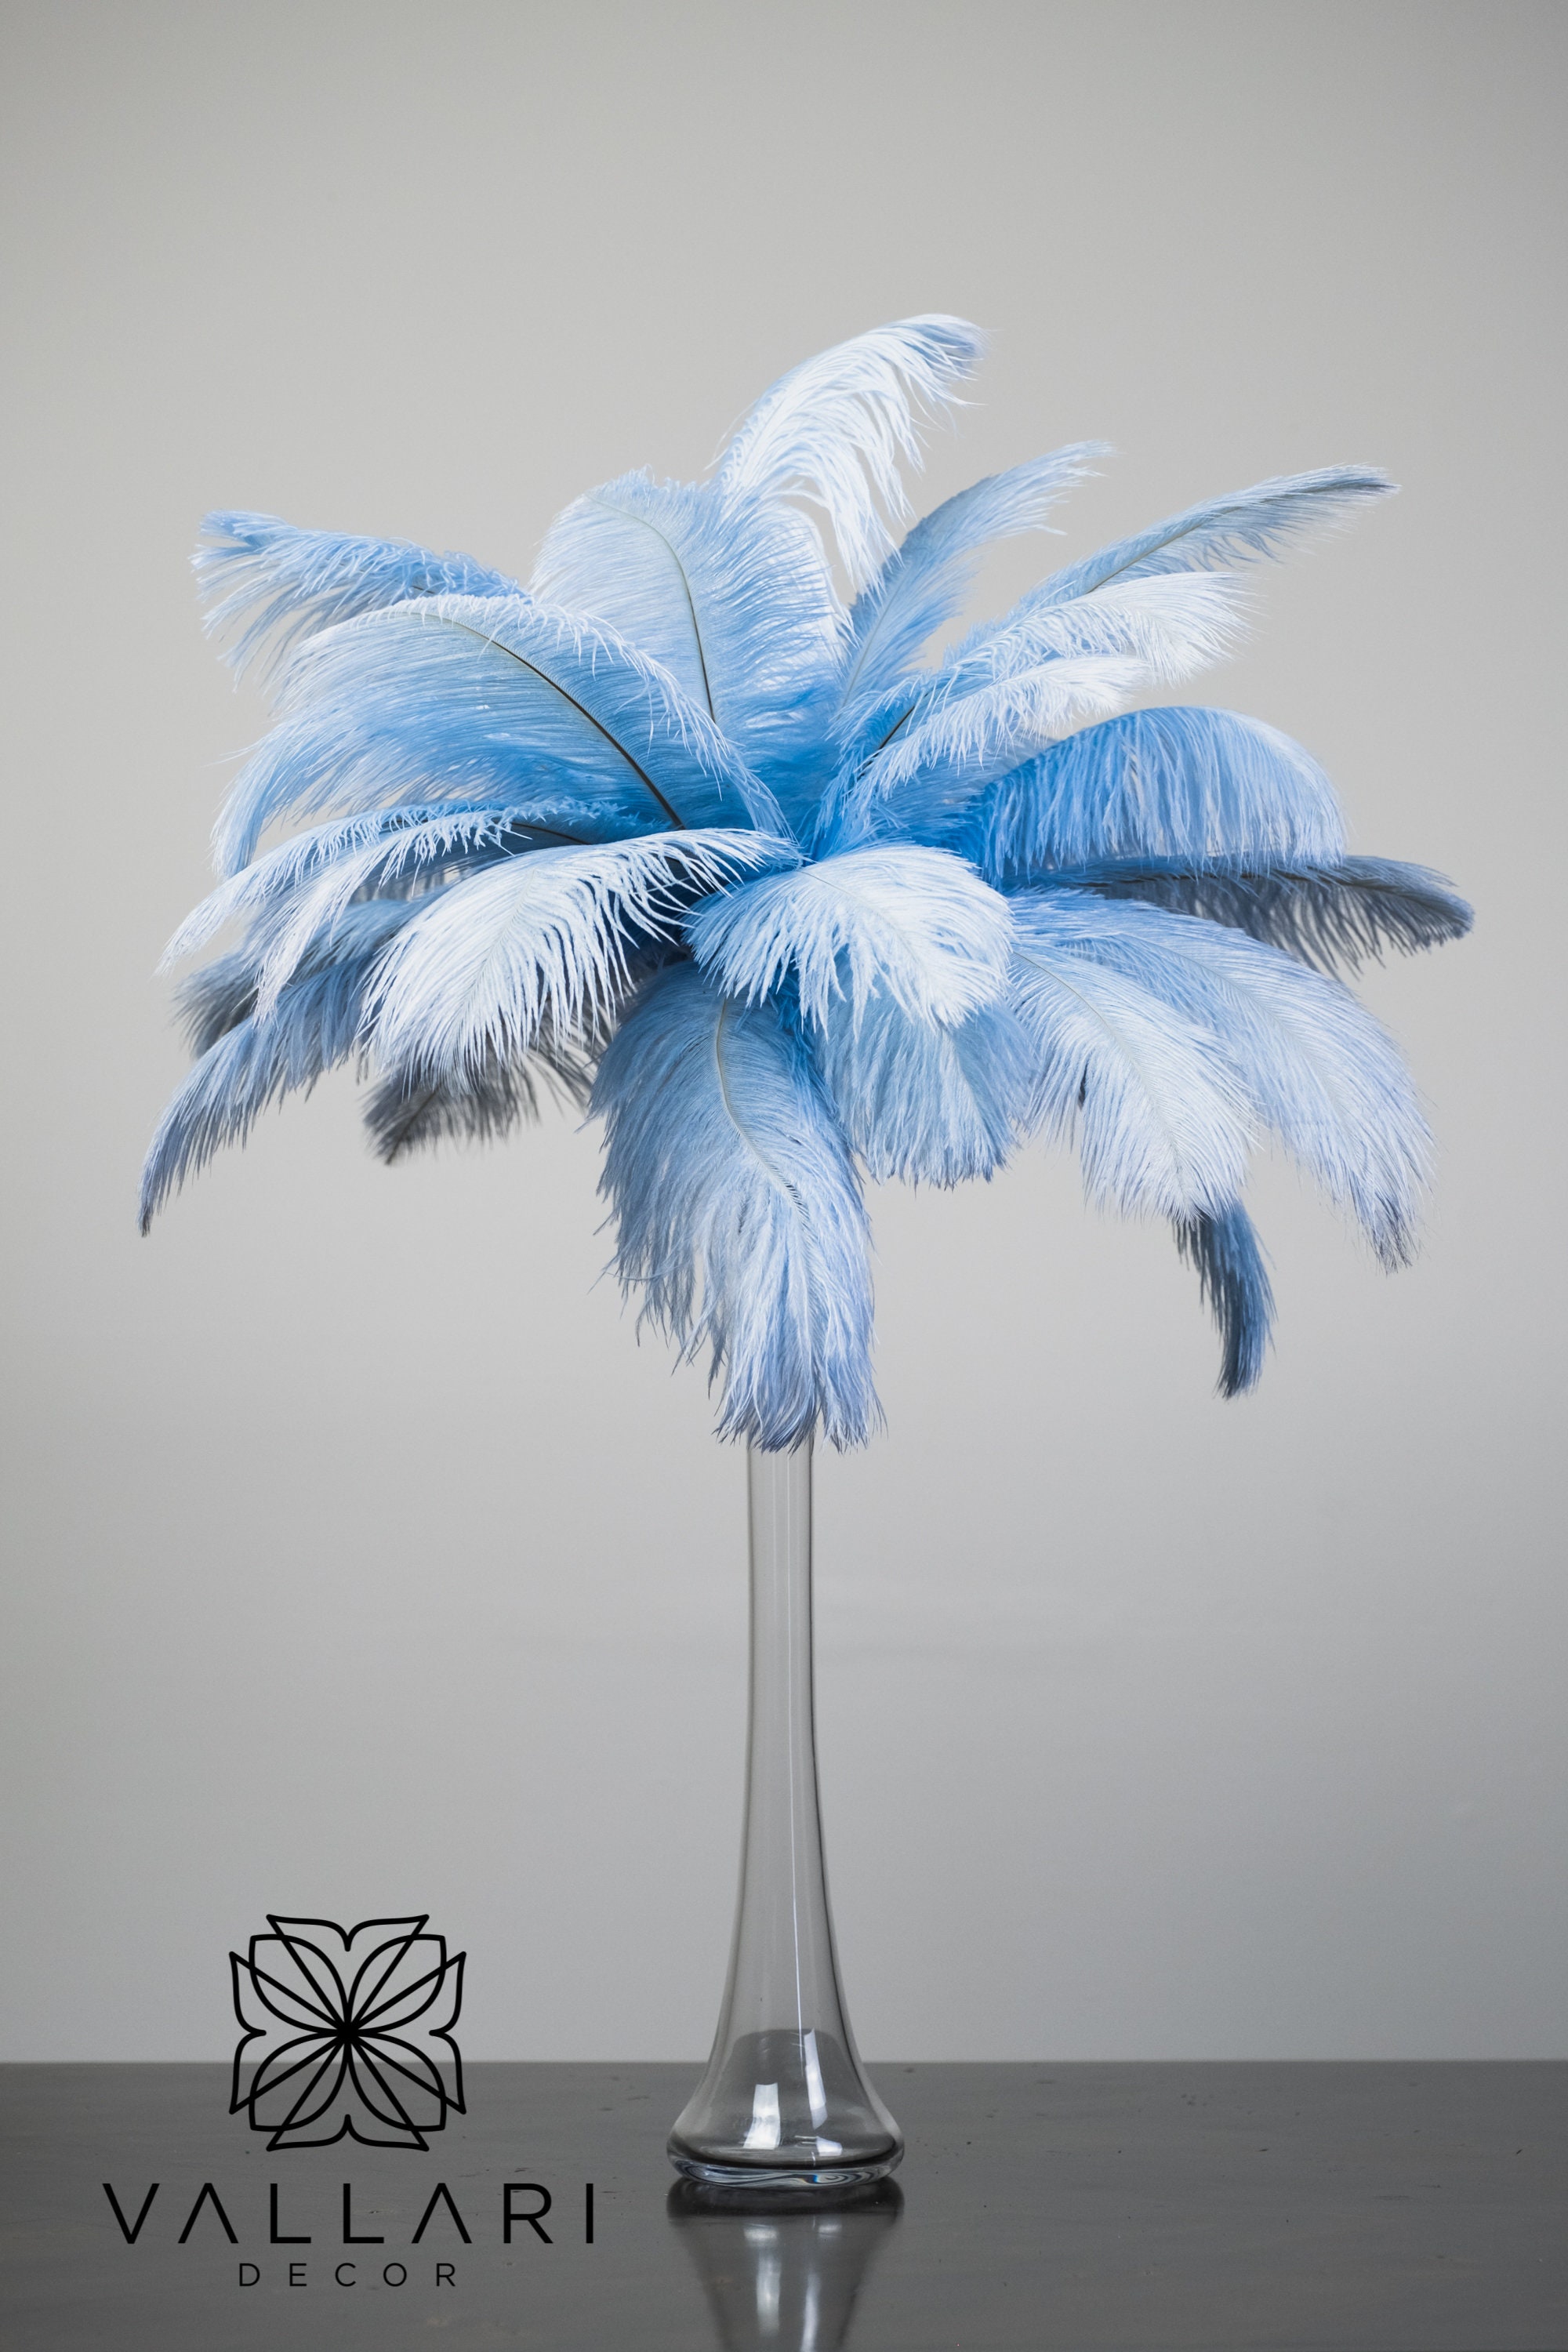 GA, USA Blue Royal Blue Ostrich Feathers 12-14 inch 100 Pieces 